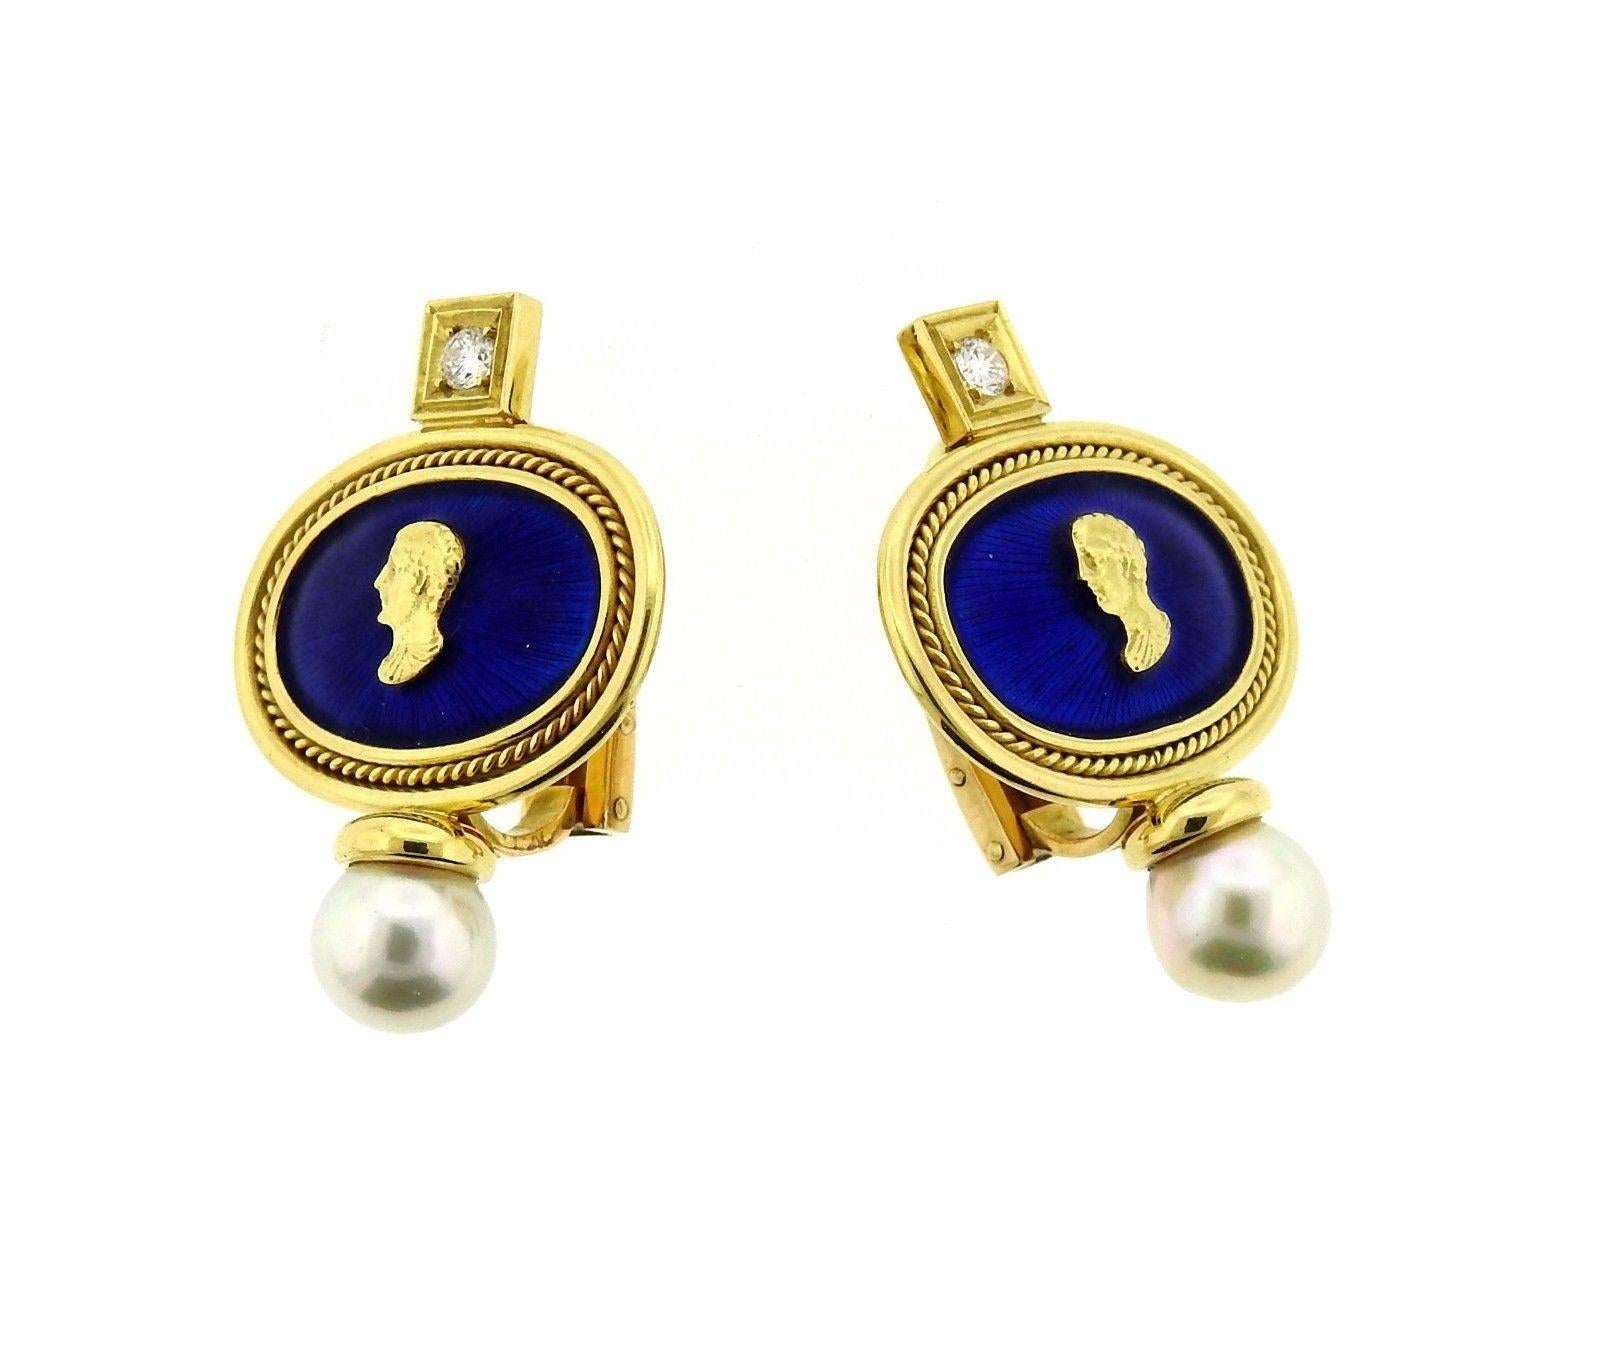 A pair of 18k yellow gold and enamel earrings set with 8.2mm pearls and approximately 0.20ctw of G/VS diamonds.  The earrings measure 33mm X 24mm and weigh 21 grams.  Marked: EG Gage 750, English gold marks.